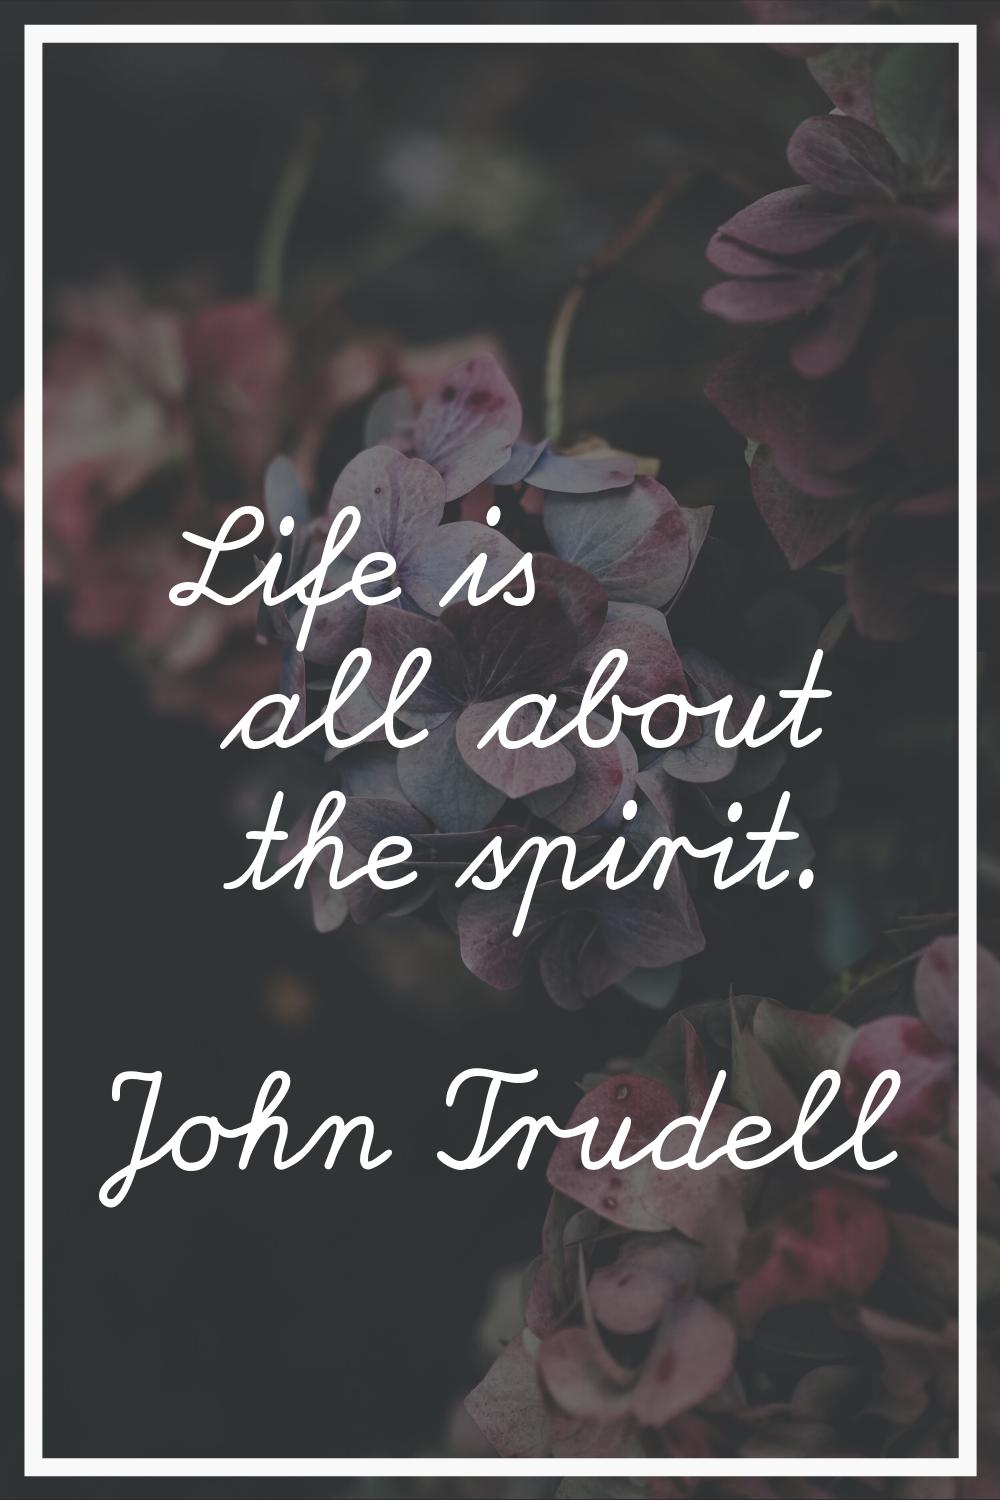 Life is all about the spirit.